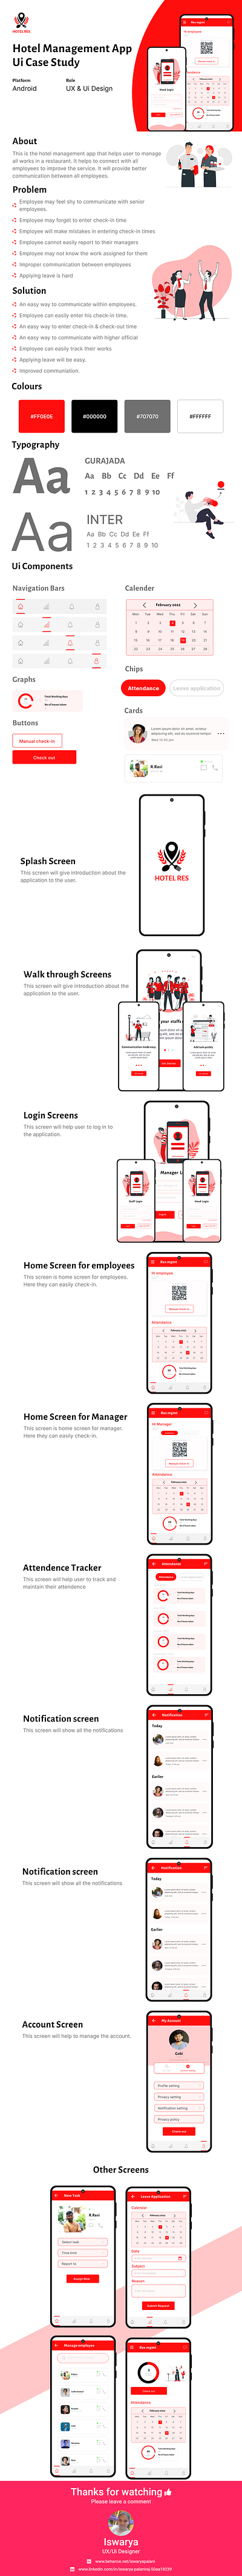 Hotel Management App for android mobiles android app app design graphic design mobile app typography ui uiux user experience ux